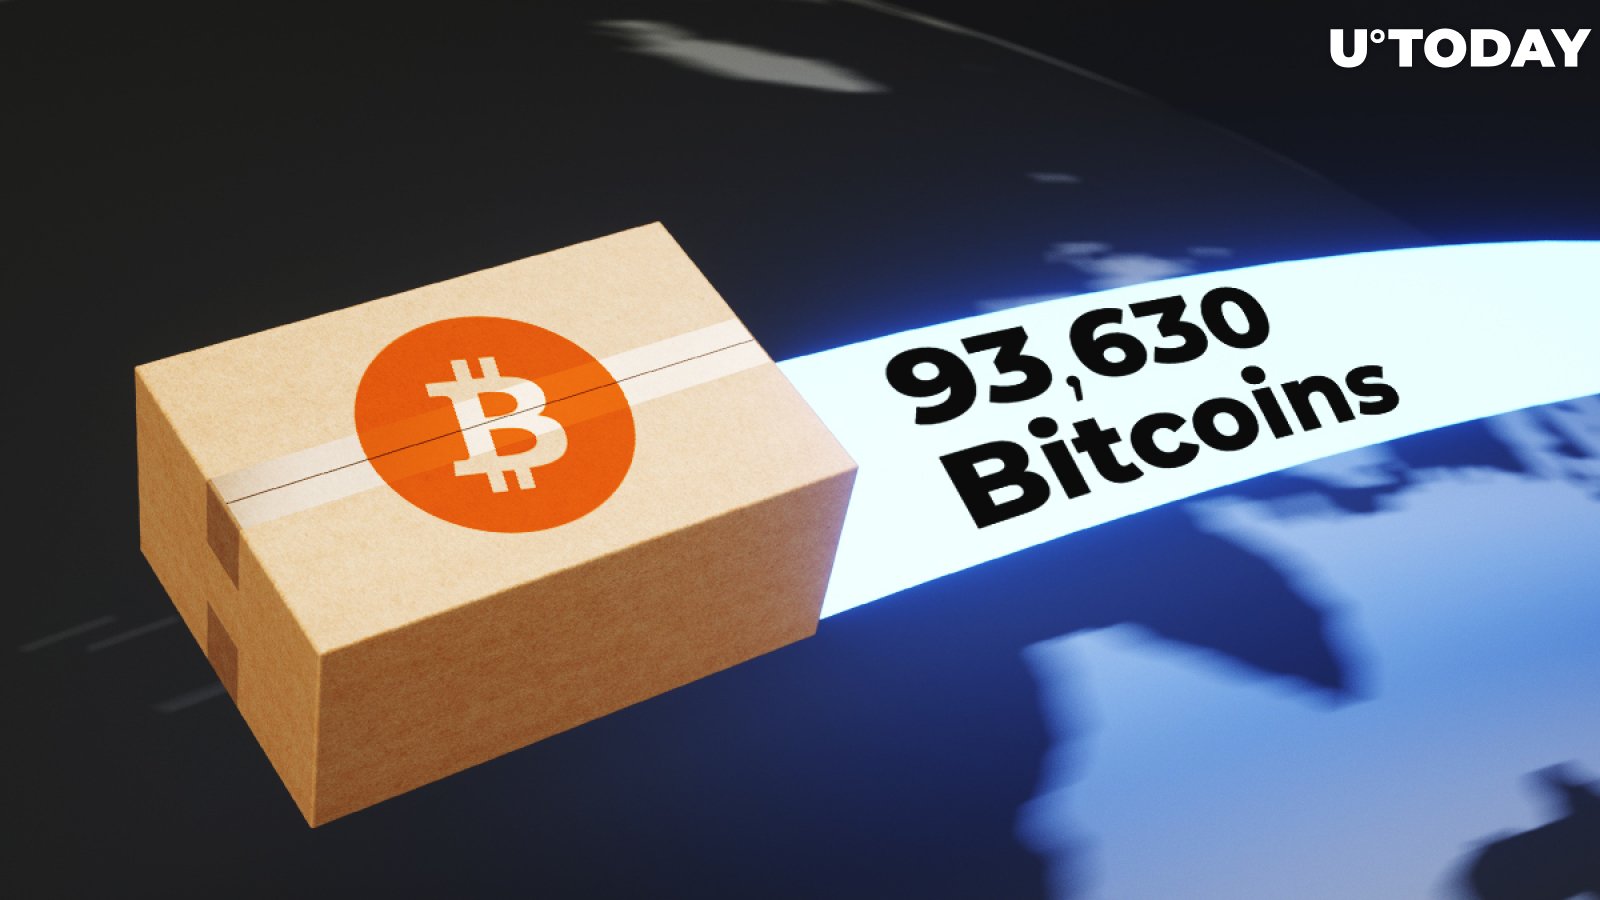 93,630 Bitcoins Sent to Centralized Exchanges